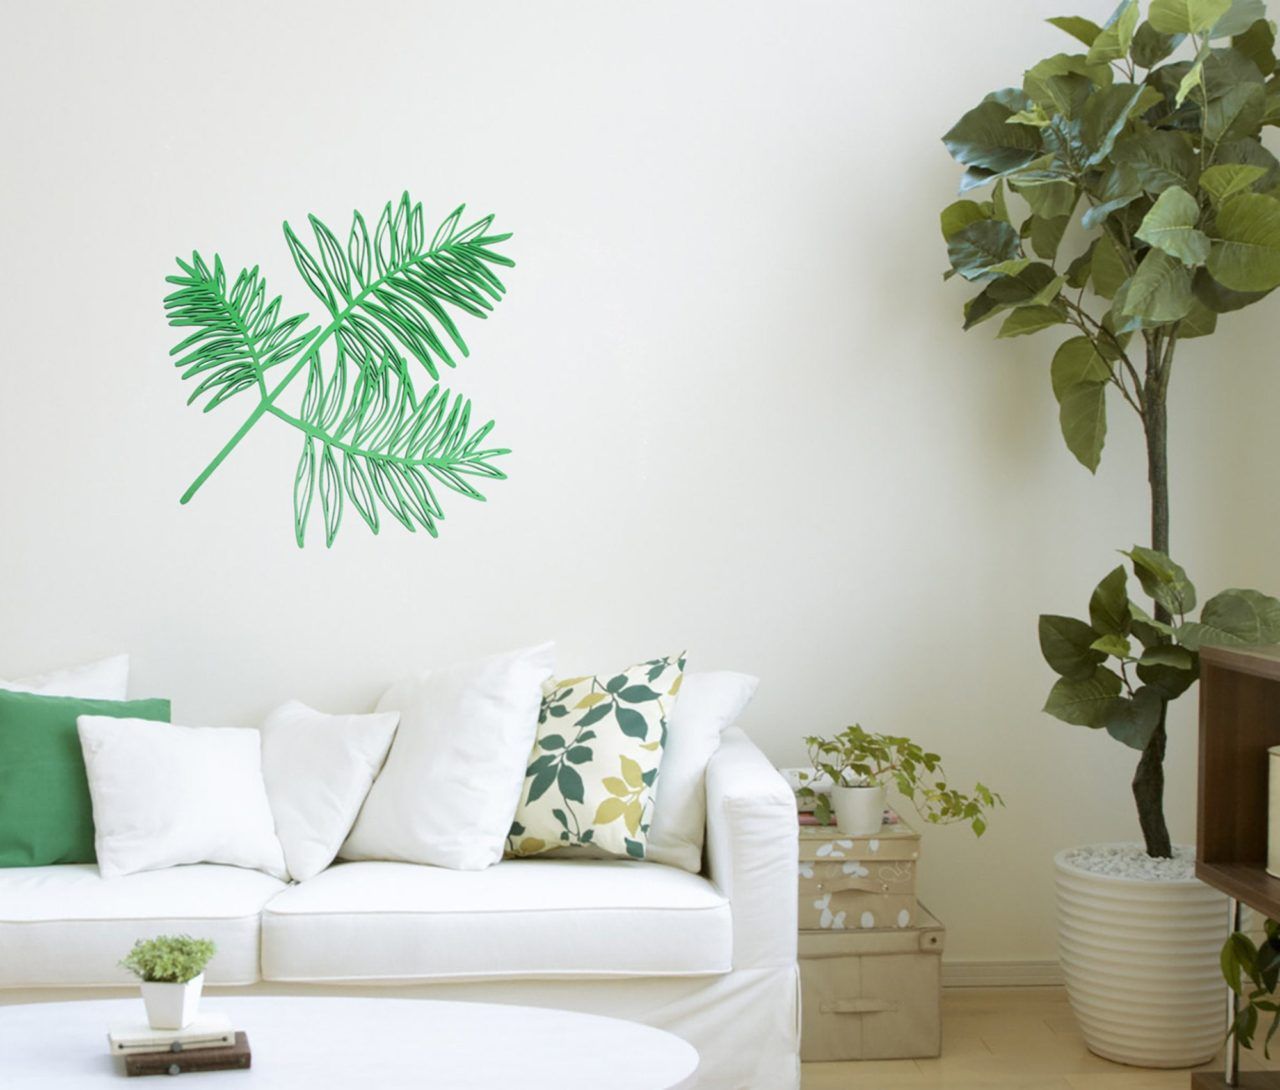 Tropical Leaf Wall Art,kentia Palm, Howea Forsteriana Plant, Thatch Intended For Current Palms Wall Art (View 14 of 20)